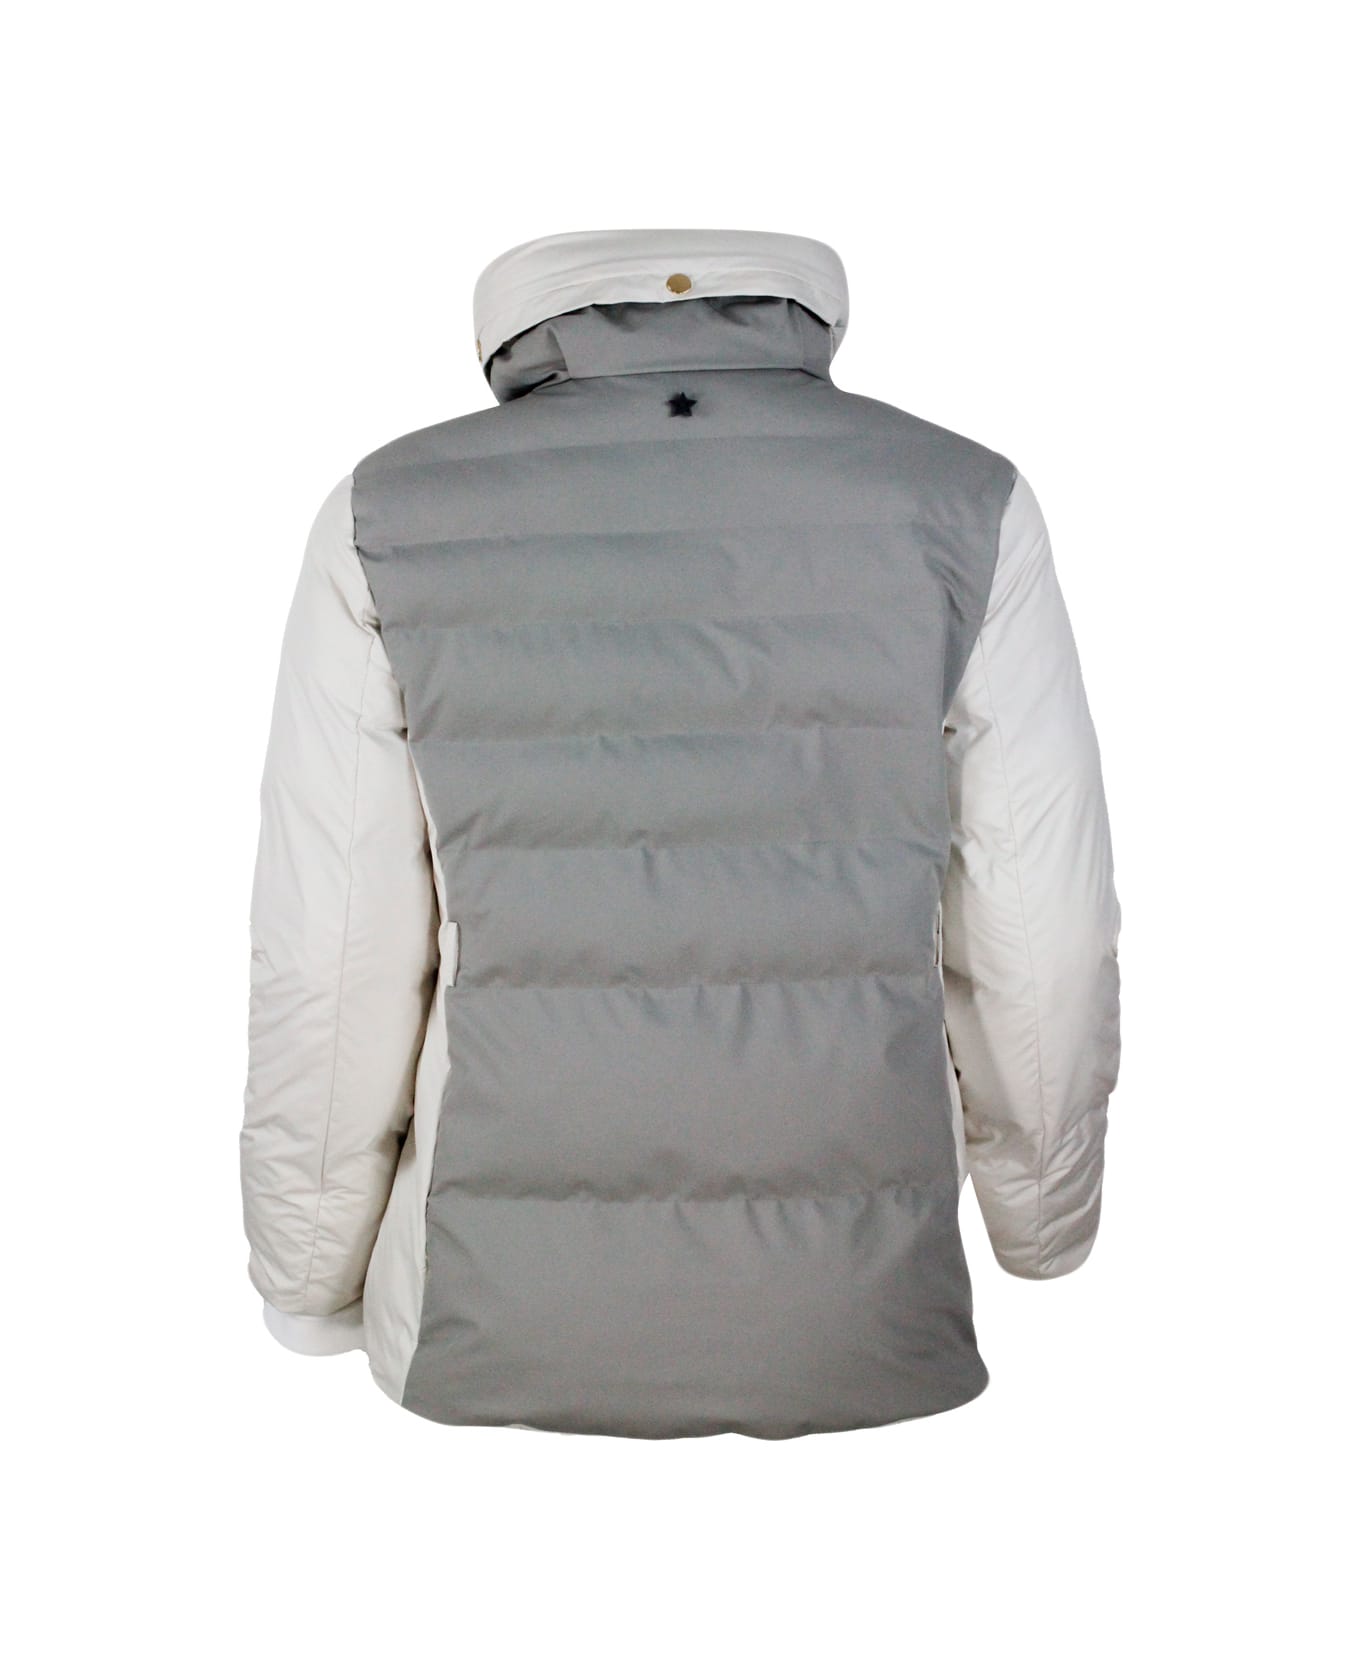 Lorena Antoniazzi Chalet Collection Down Jacket In Two-tone Technical Fabric With Openable Collar And Zip Closure - Grey